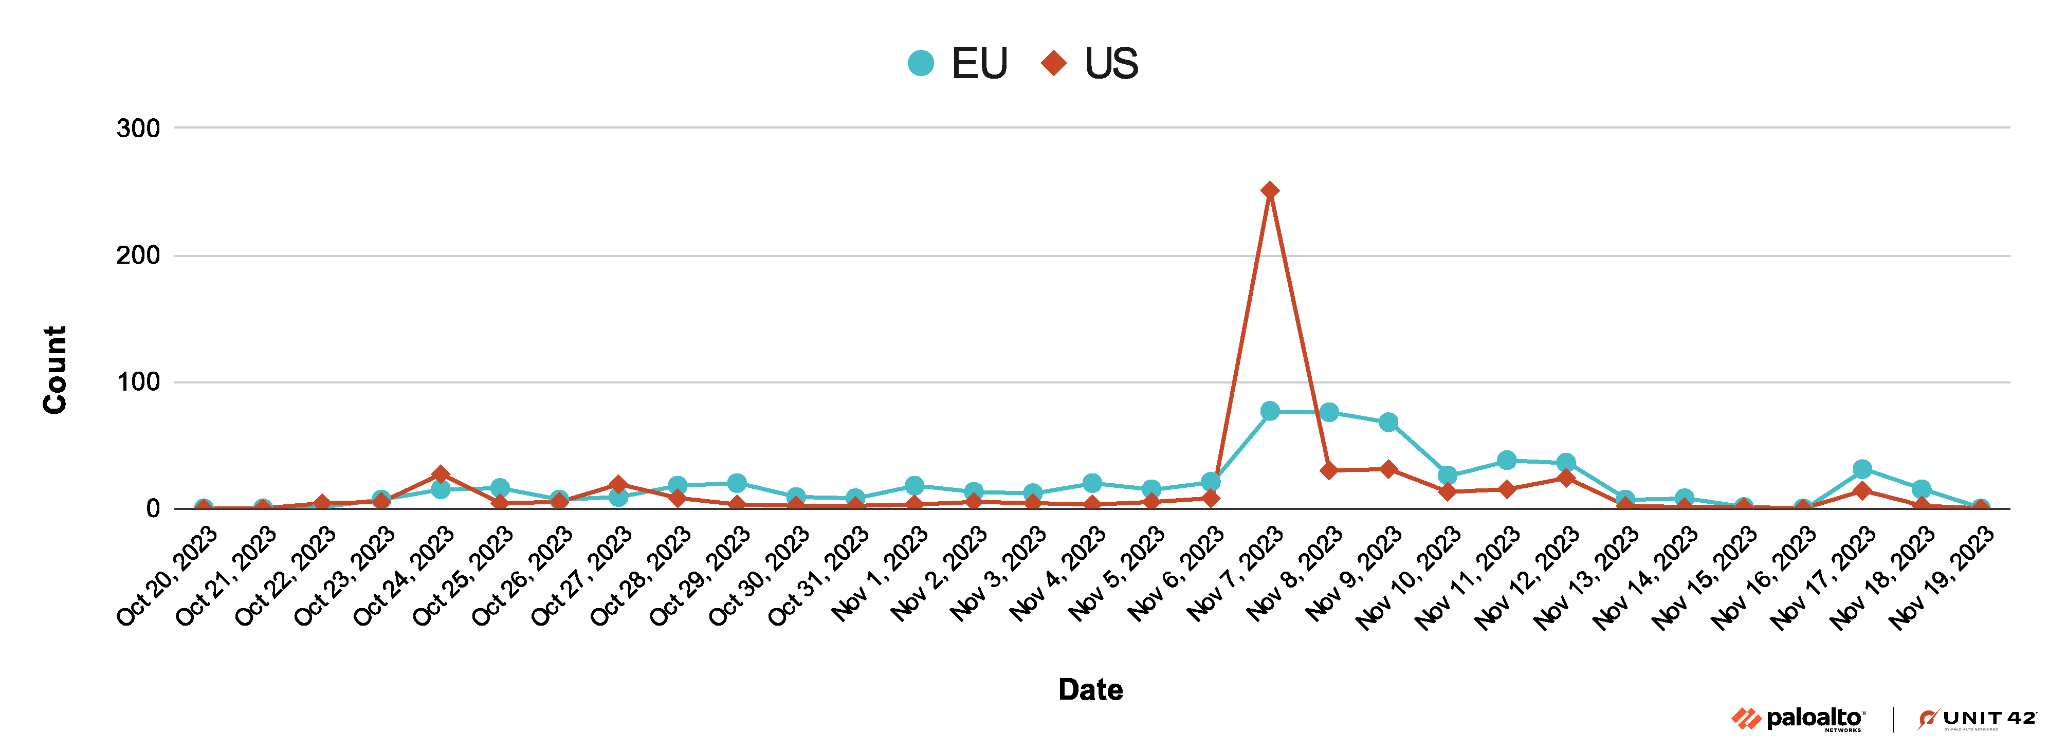 Image 1 is a line graph comparing the attack count between the United States and the European Union in 2023, starting October 20th and ending November 19th. The highest period is from November 6 to November 8. This is the highest point for the United States. The European Union sees a similar trajectory to the United States, but it is much less pronounced.